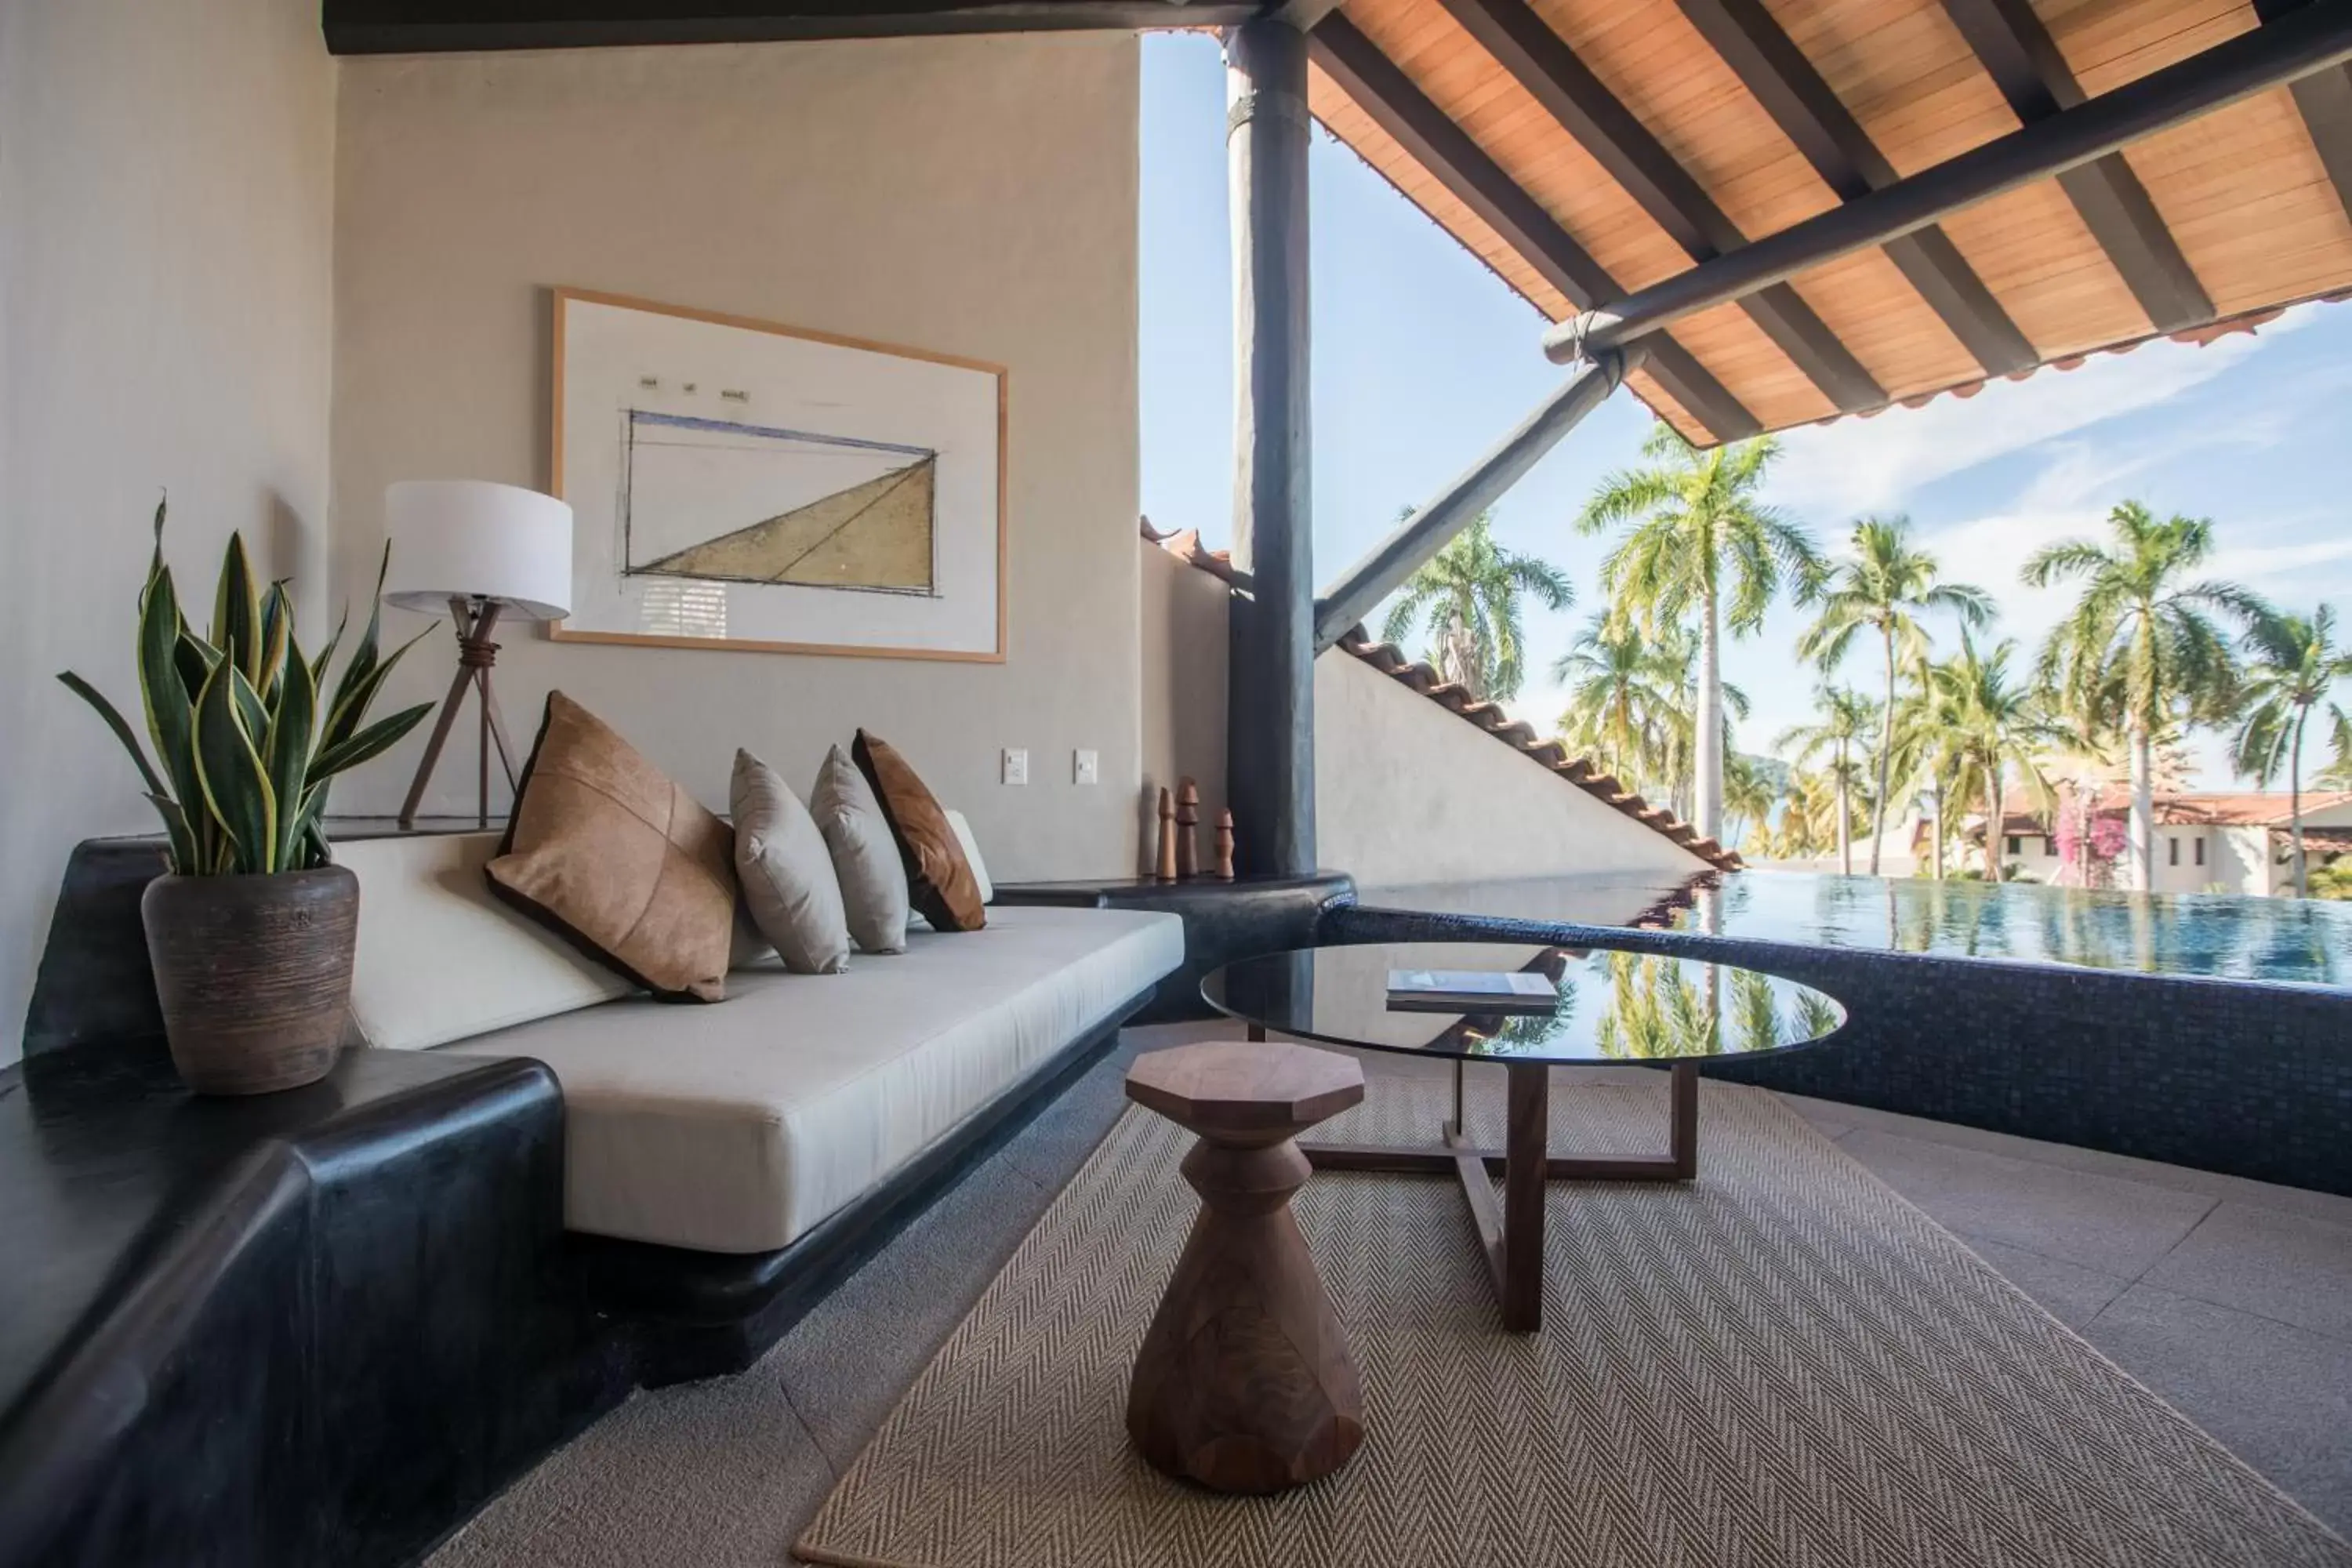 Penthouse Suite with Ocean View  in Thompson Zihuatanejo, a Beach Resort, part of Hyatt